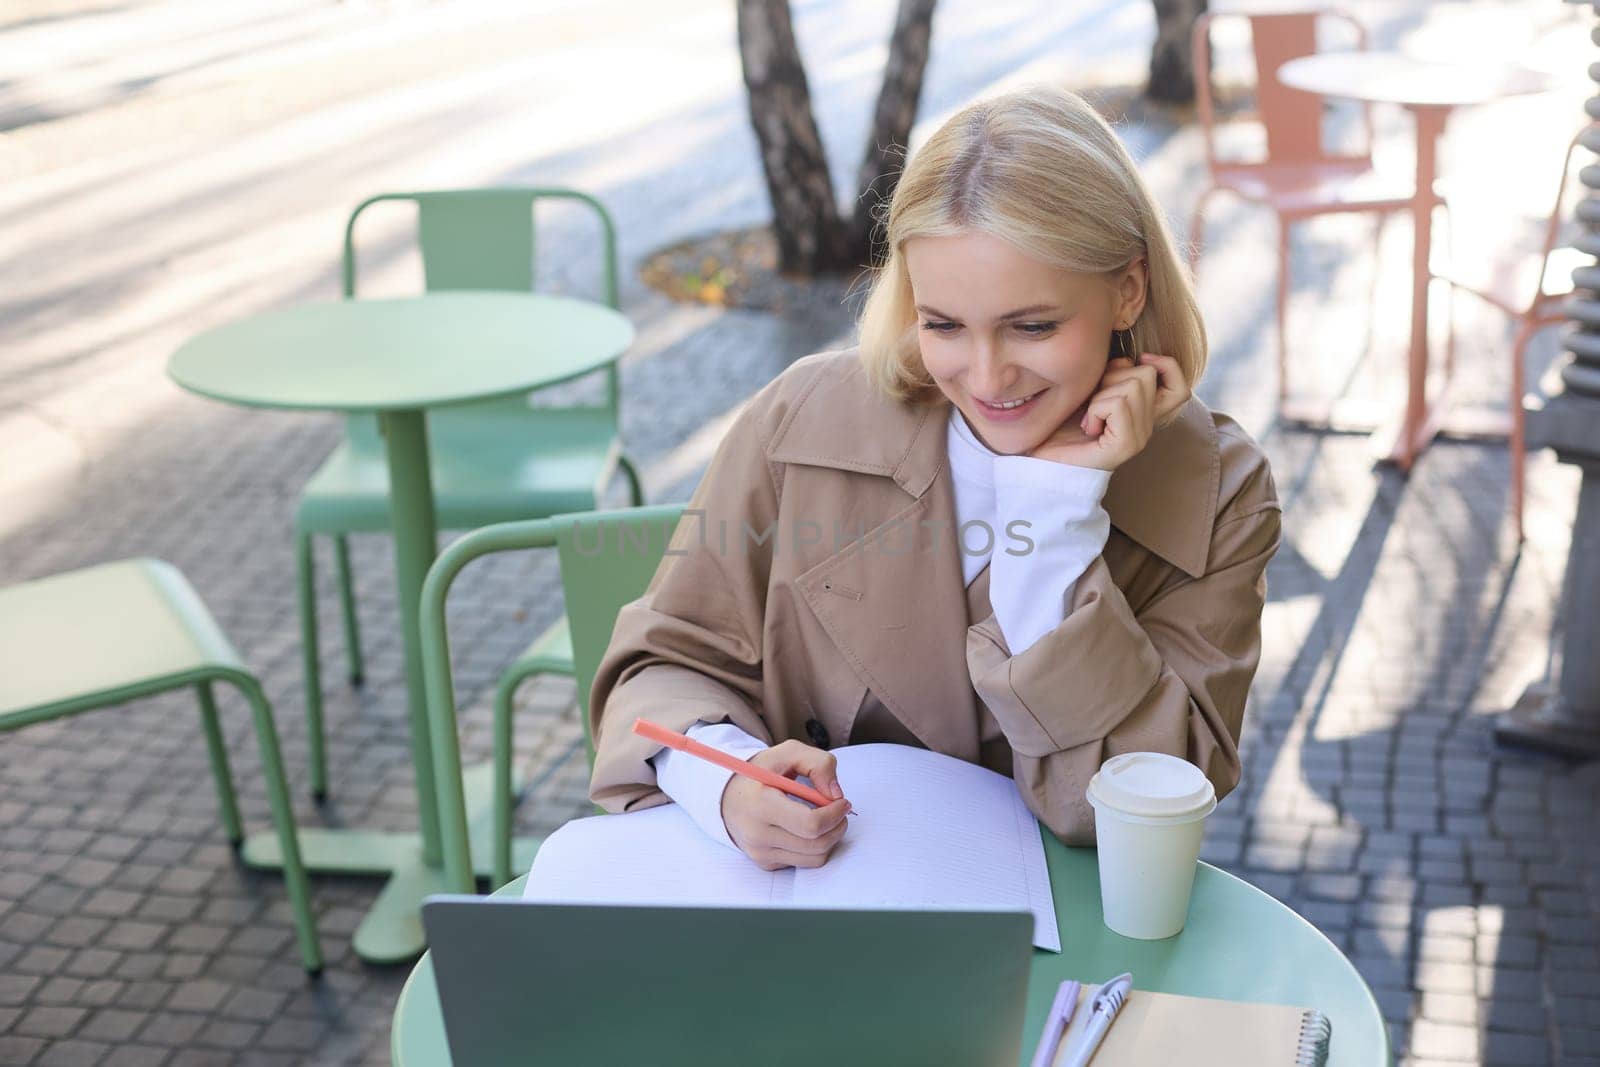 Image of smiling young female student, working on project, sitting outside on sunny day in cafe, looking at laptop and making notes, studying, doing homework outdoors.